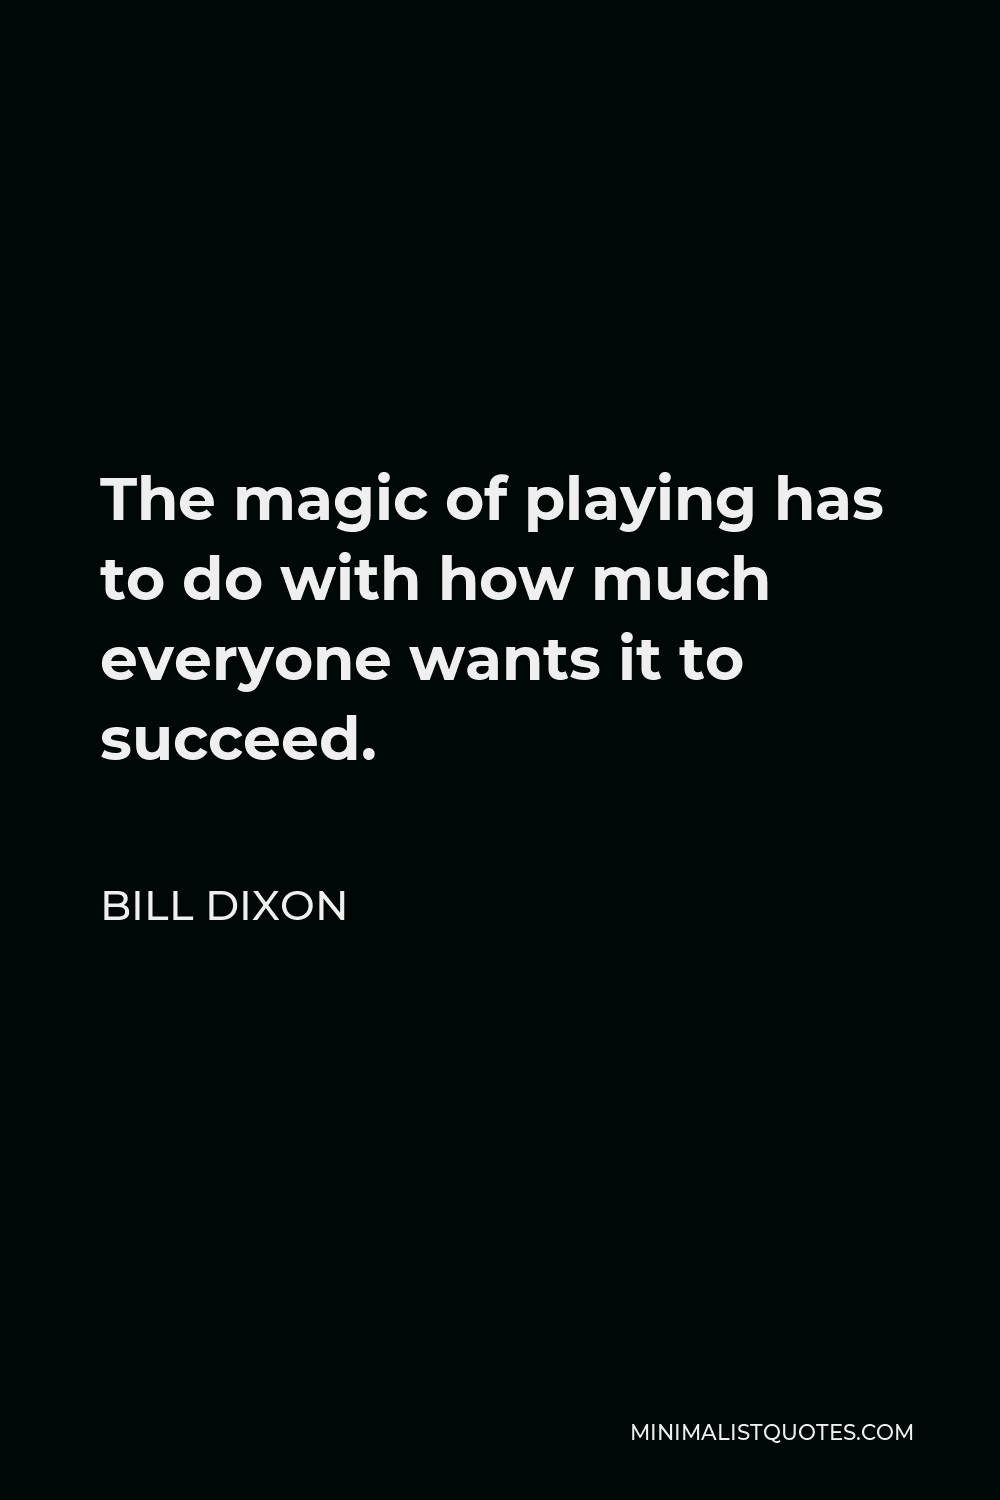 Bill Dixon Quote - The magic of playing has to do with how much everyone wants it to succeed.